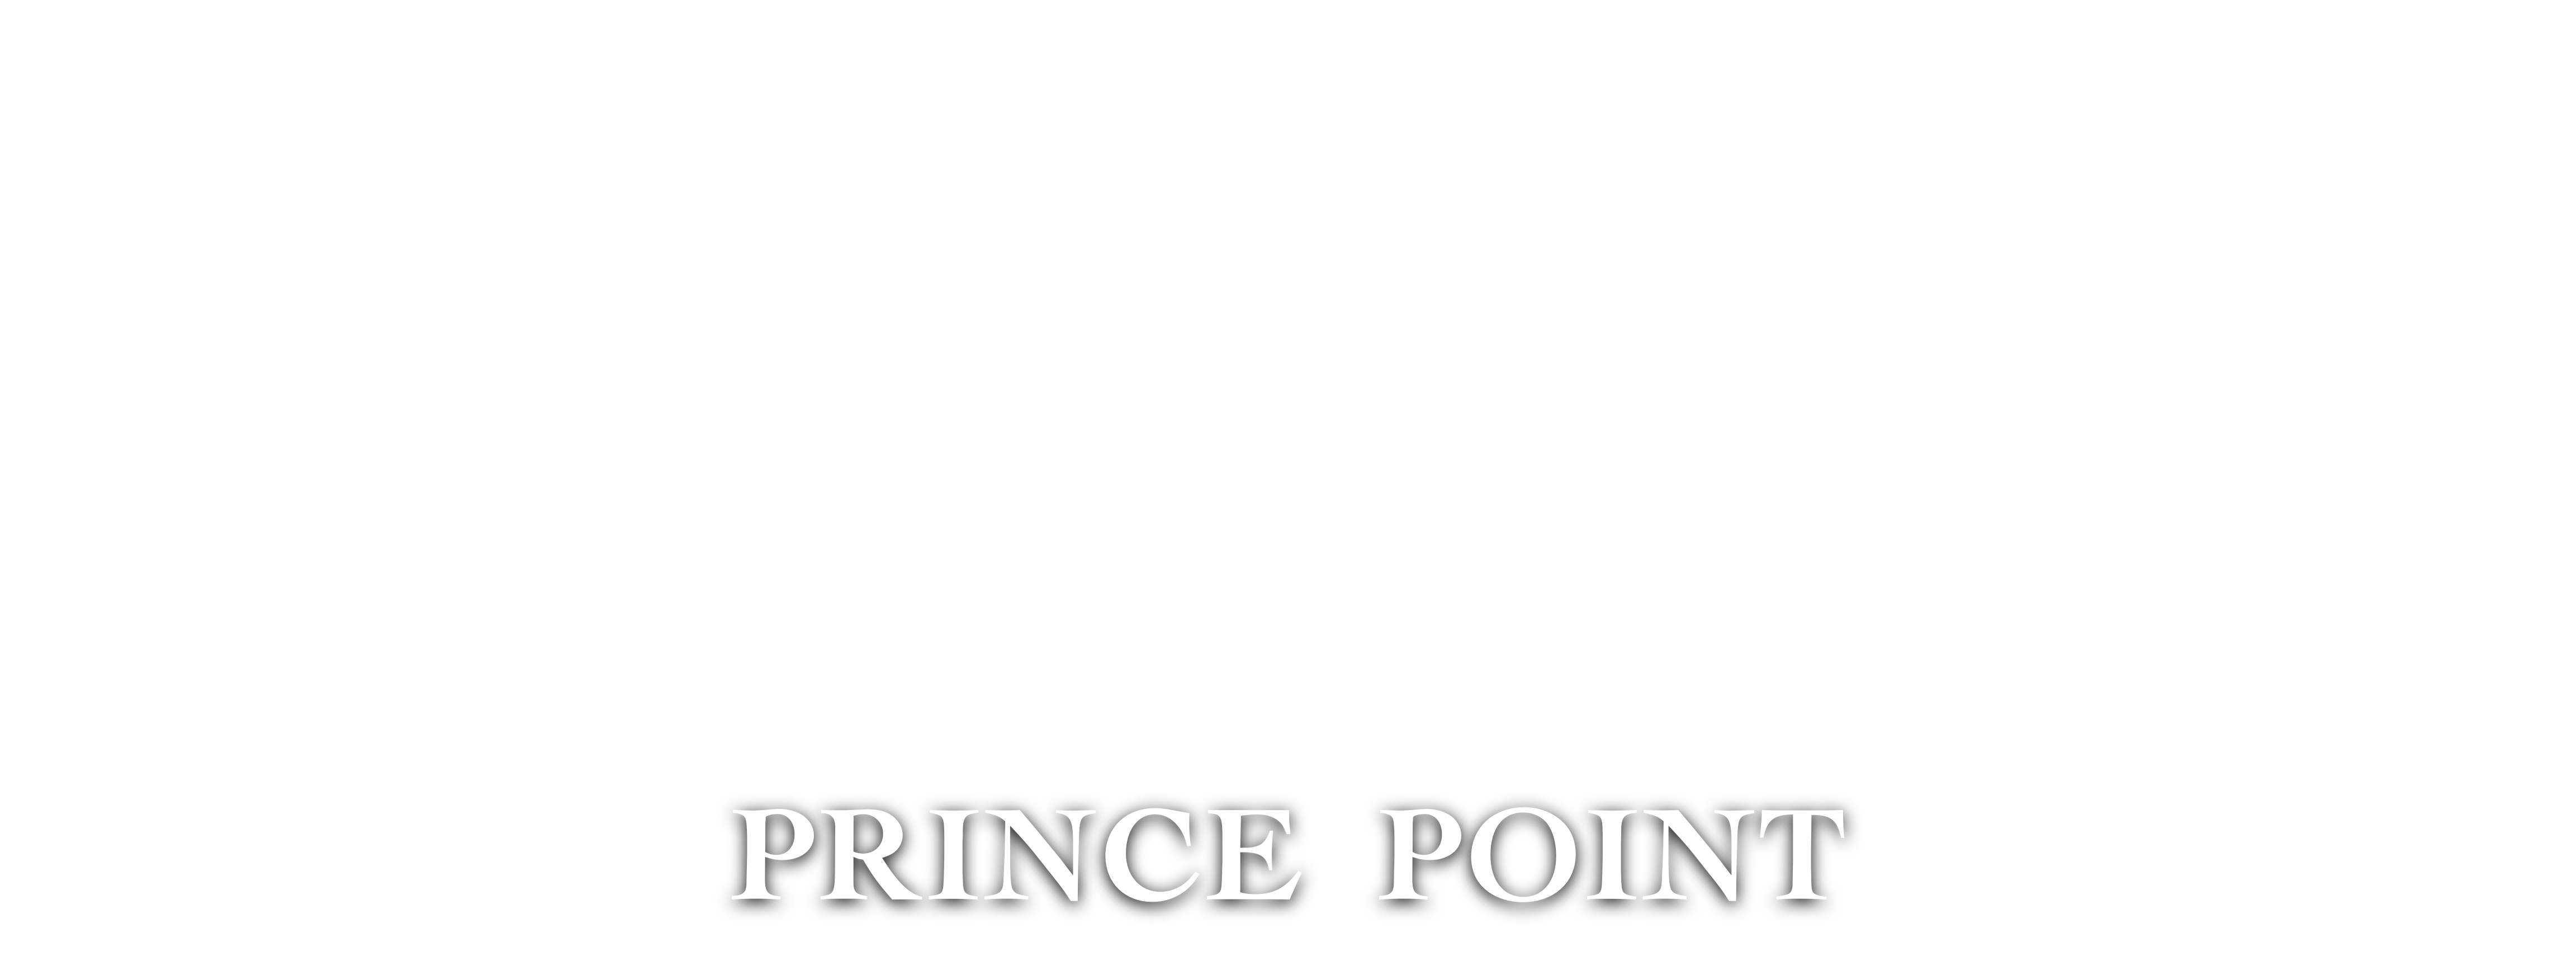 PRINCE POINT